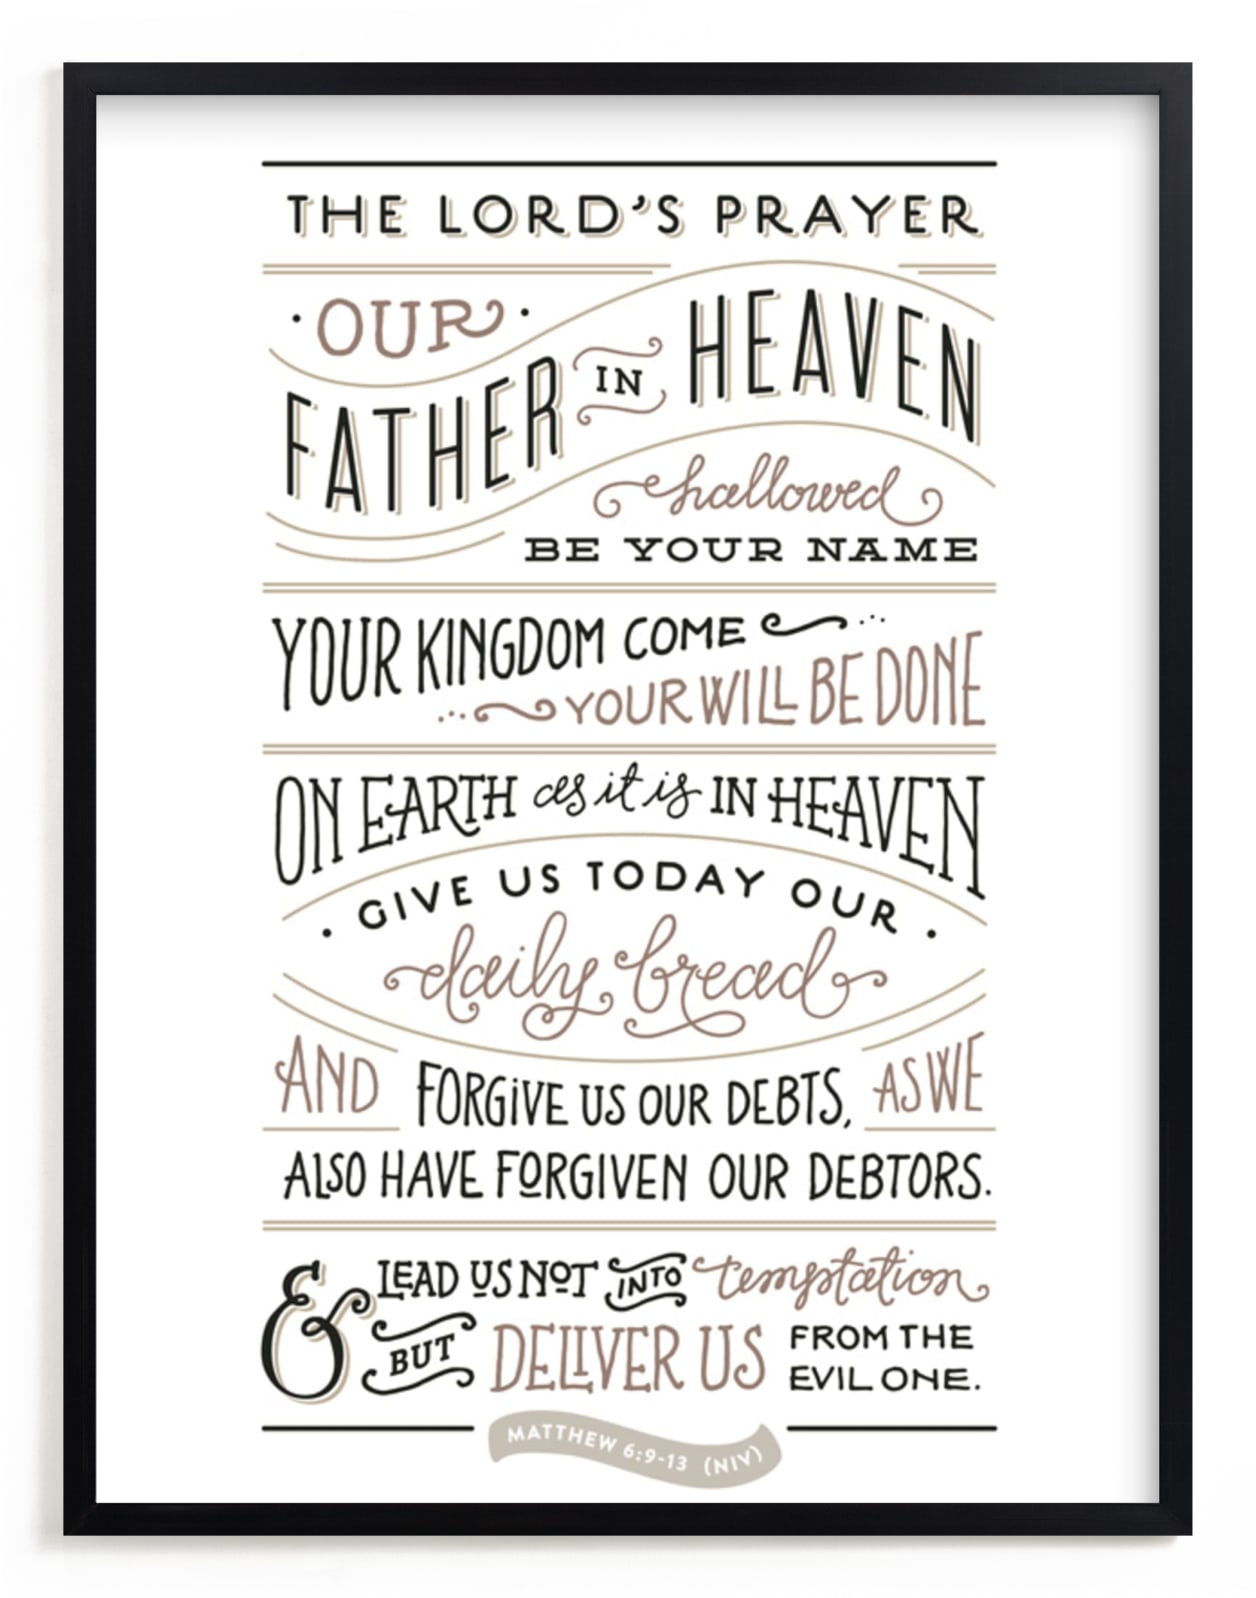 The Lord's Prayer (Maybe do this with the marker/contact paper